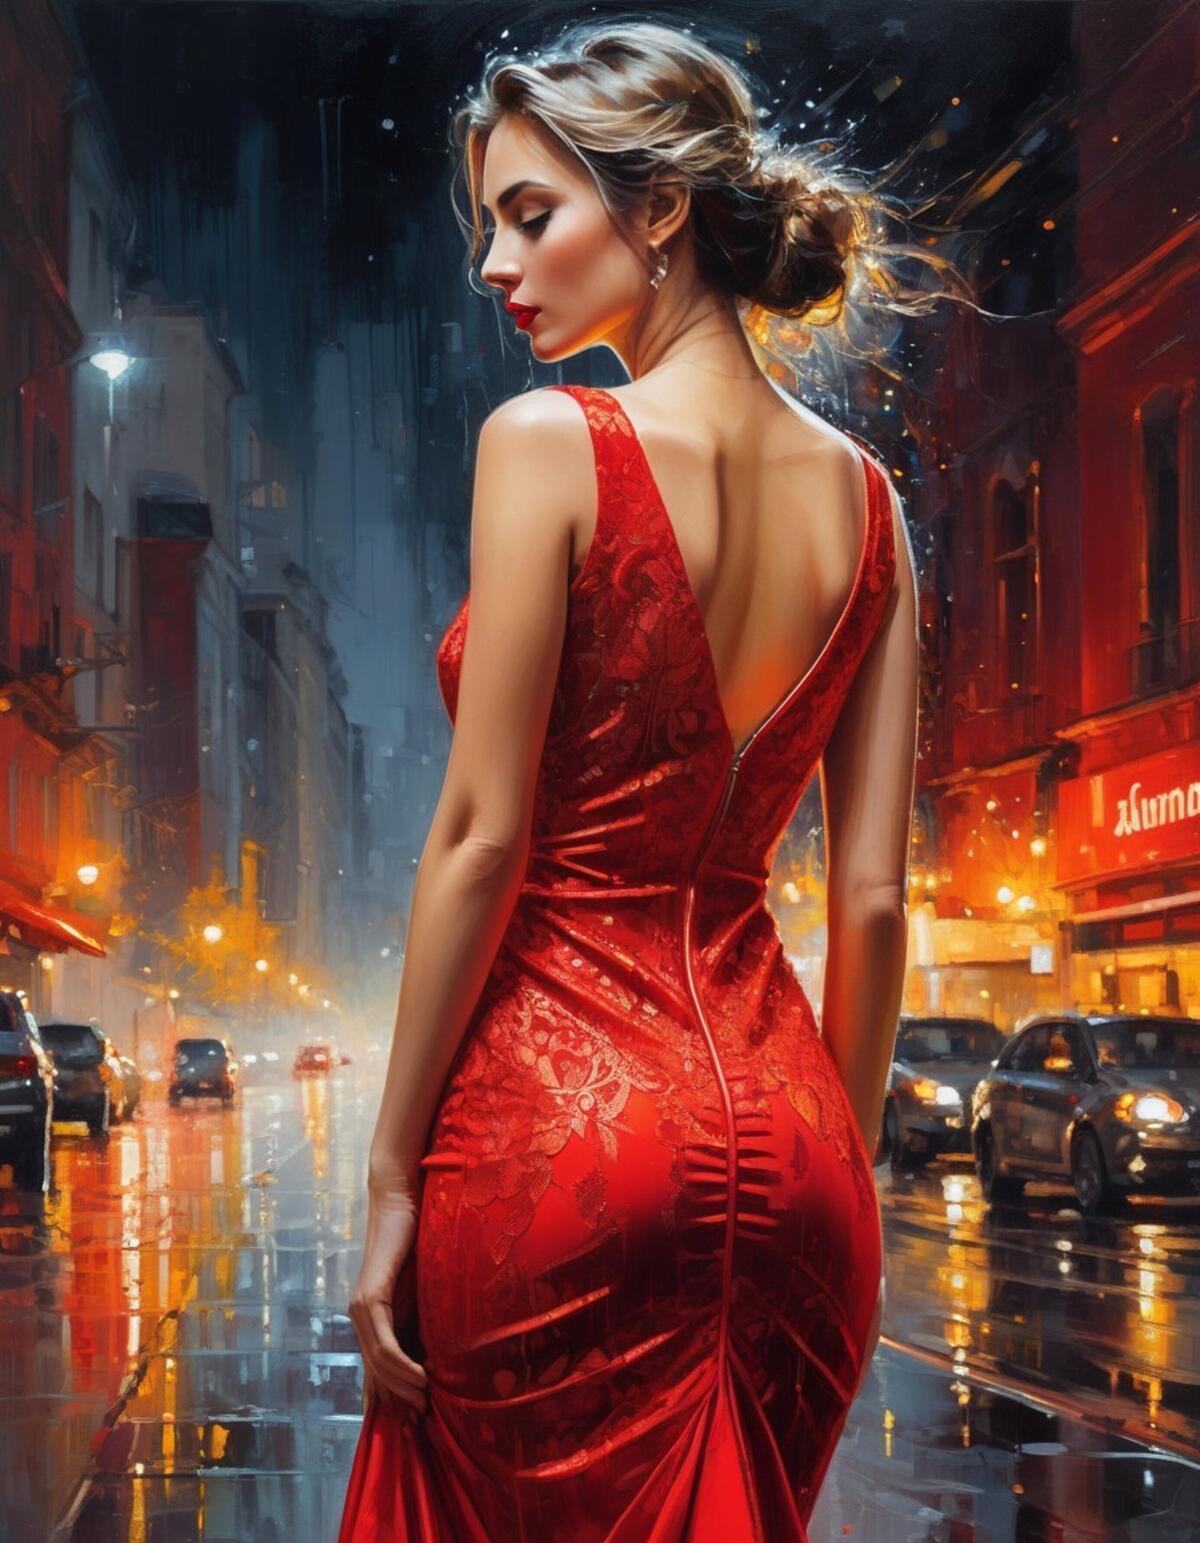 The woman in red in the evening